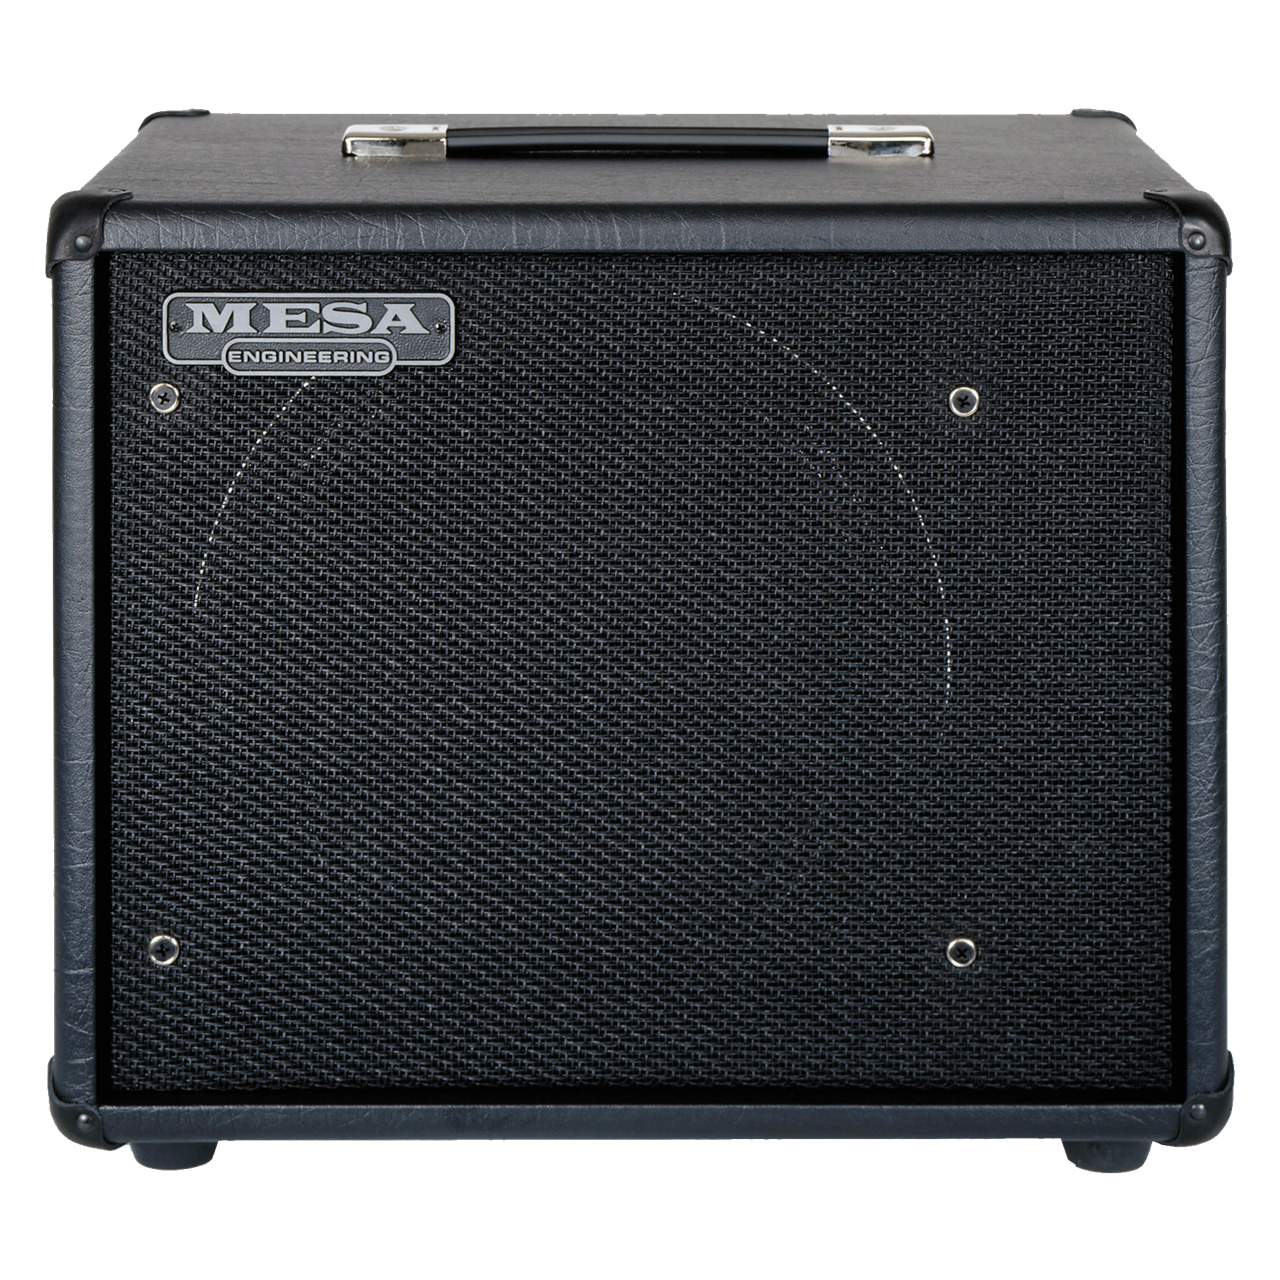 MESA Boogie 1x12 Compact Cabinet Thiele Closed Back